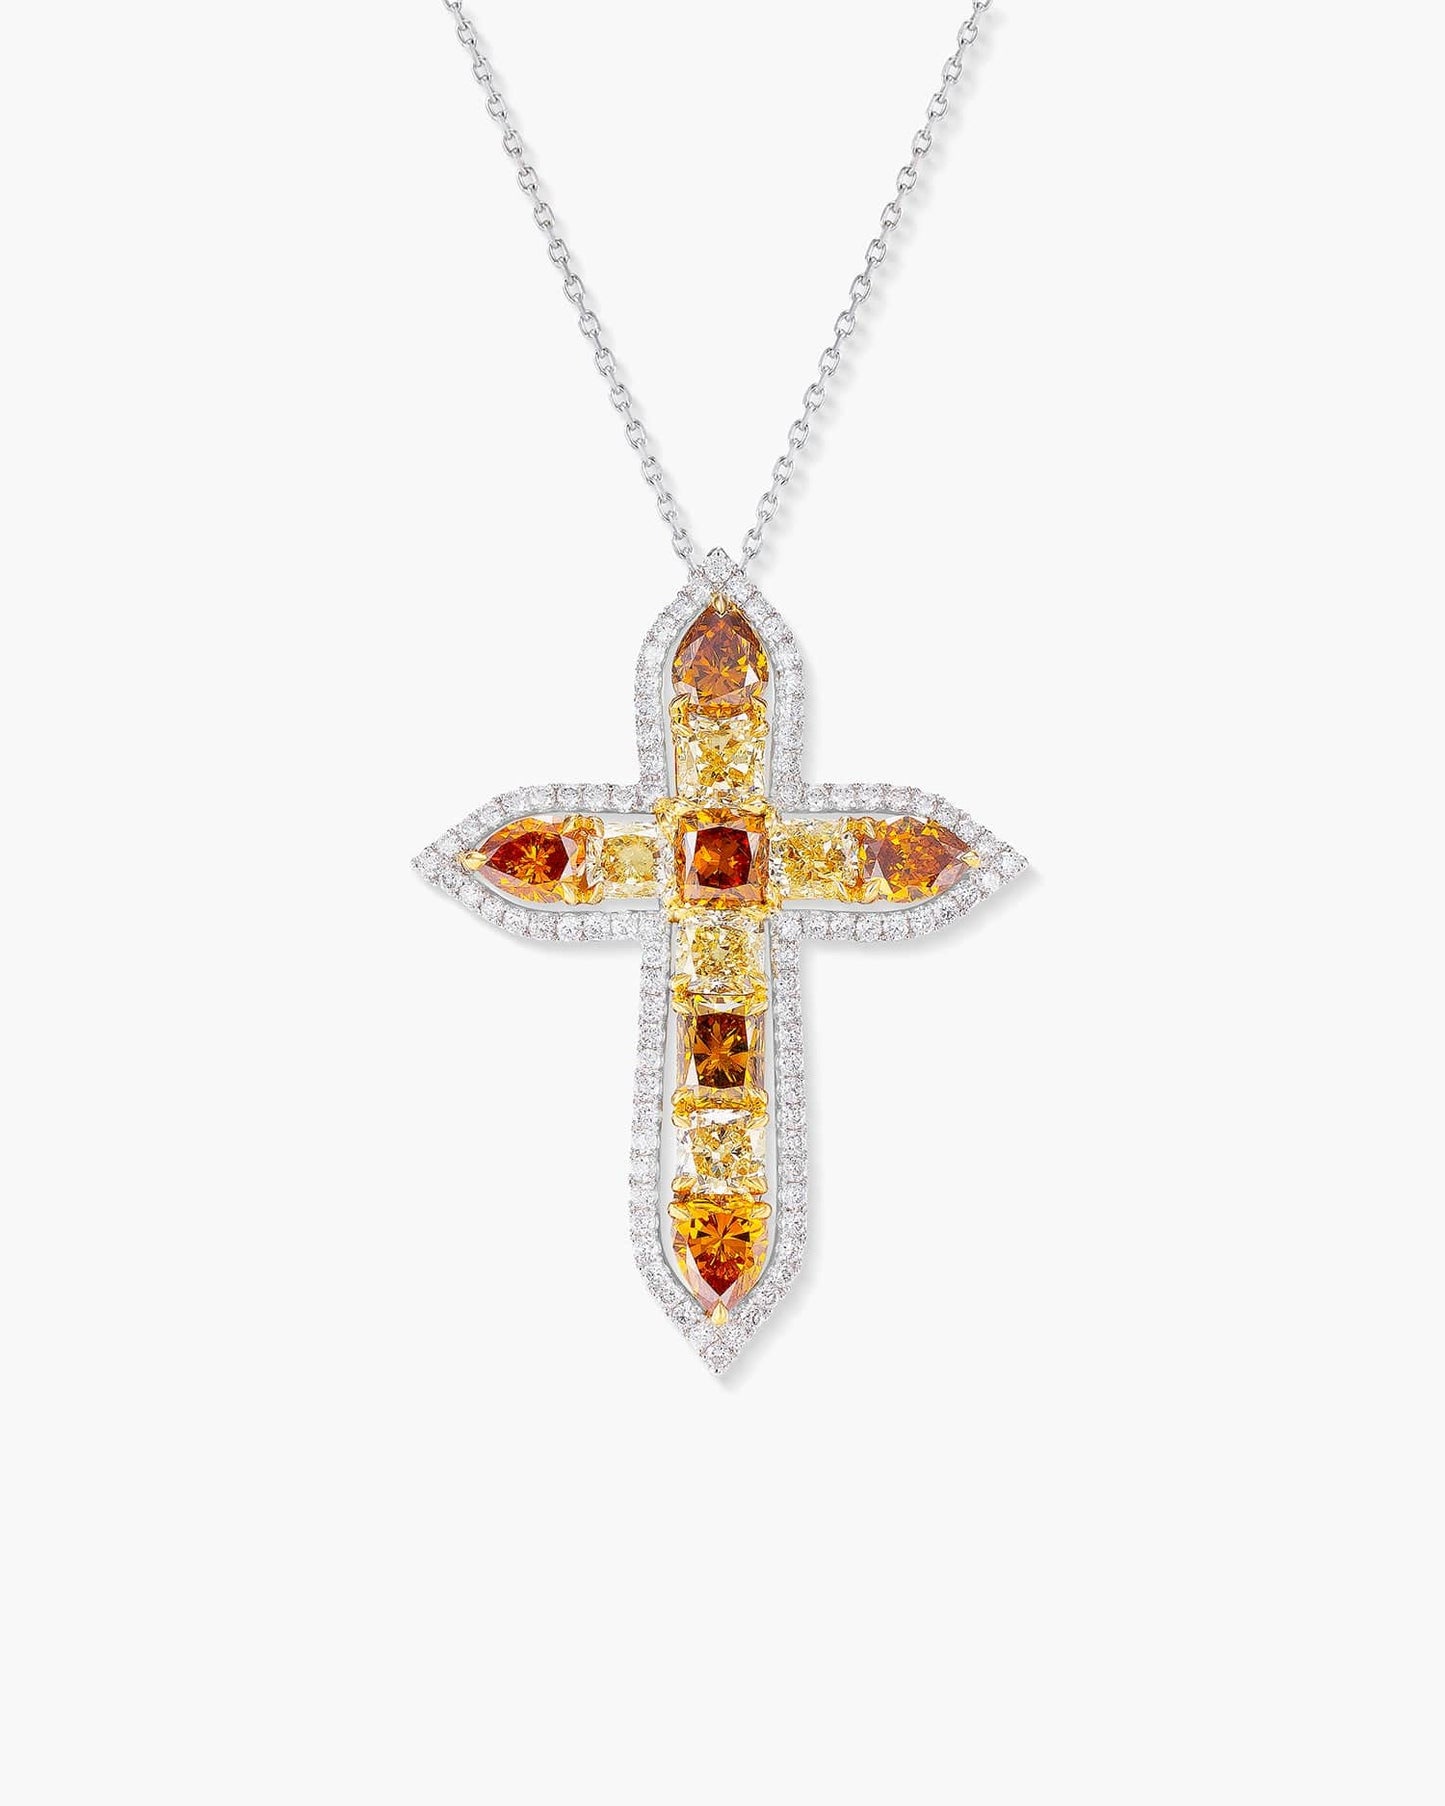 Fancy Coloured and White Diamond Cross Pendant Necklace, 6.53 carats